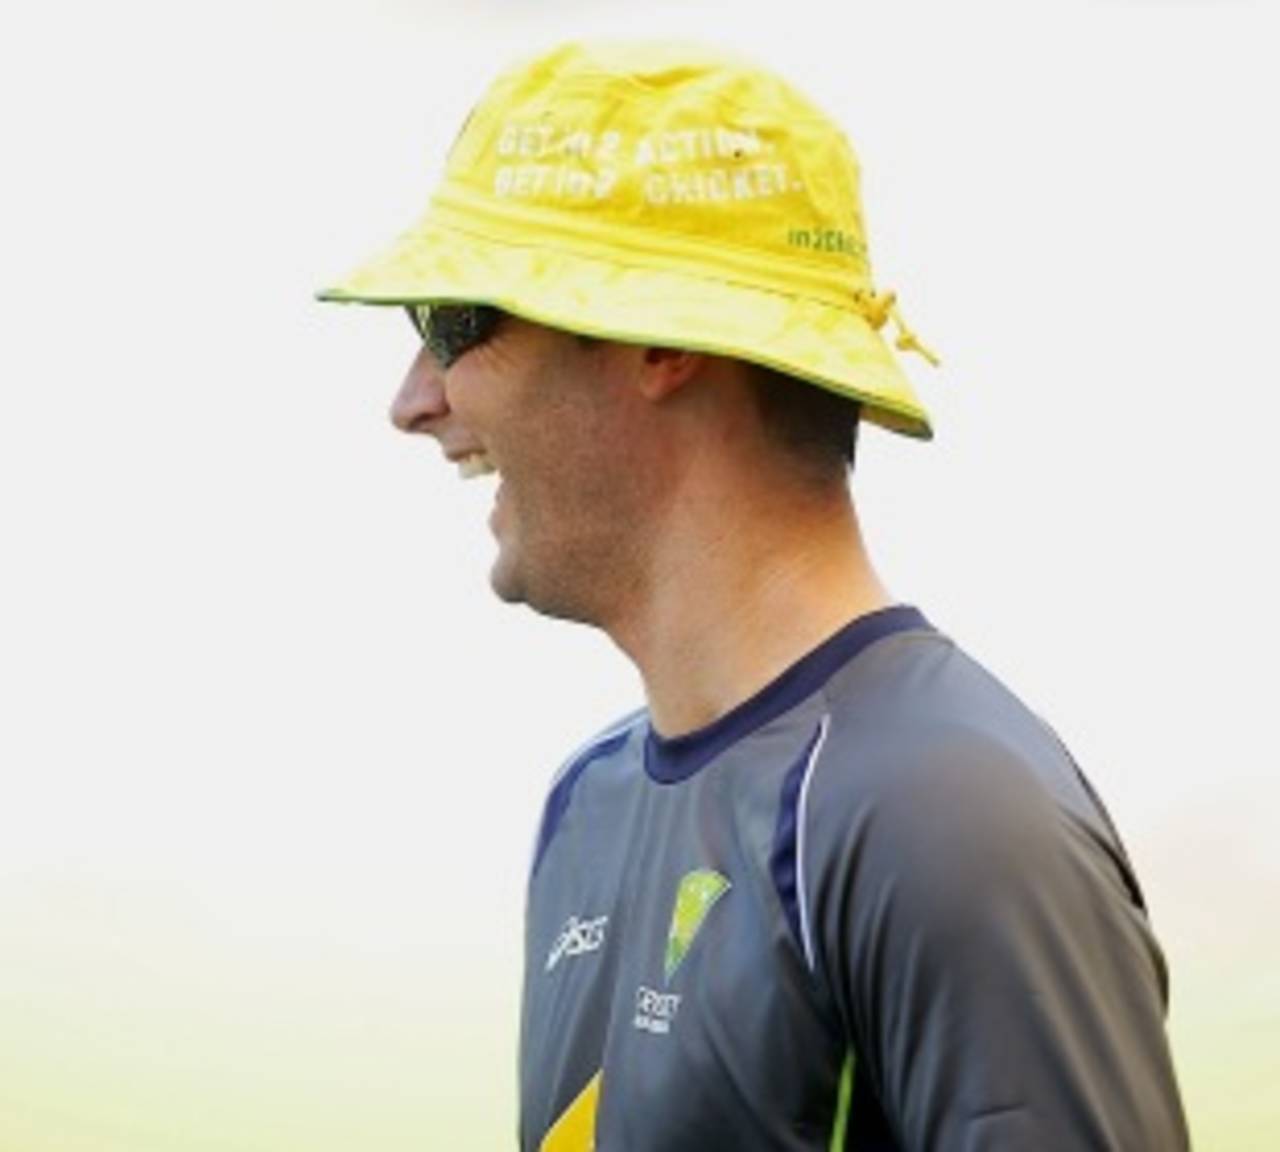 If Shane Watson opens with David Warner, Michael Clarke can bat at No. 4, the position he's best suited to&nbsp;&nbsp;&bull;&nbsp;&nbsp;Getty Images